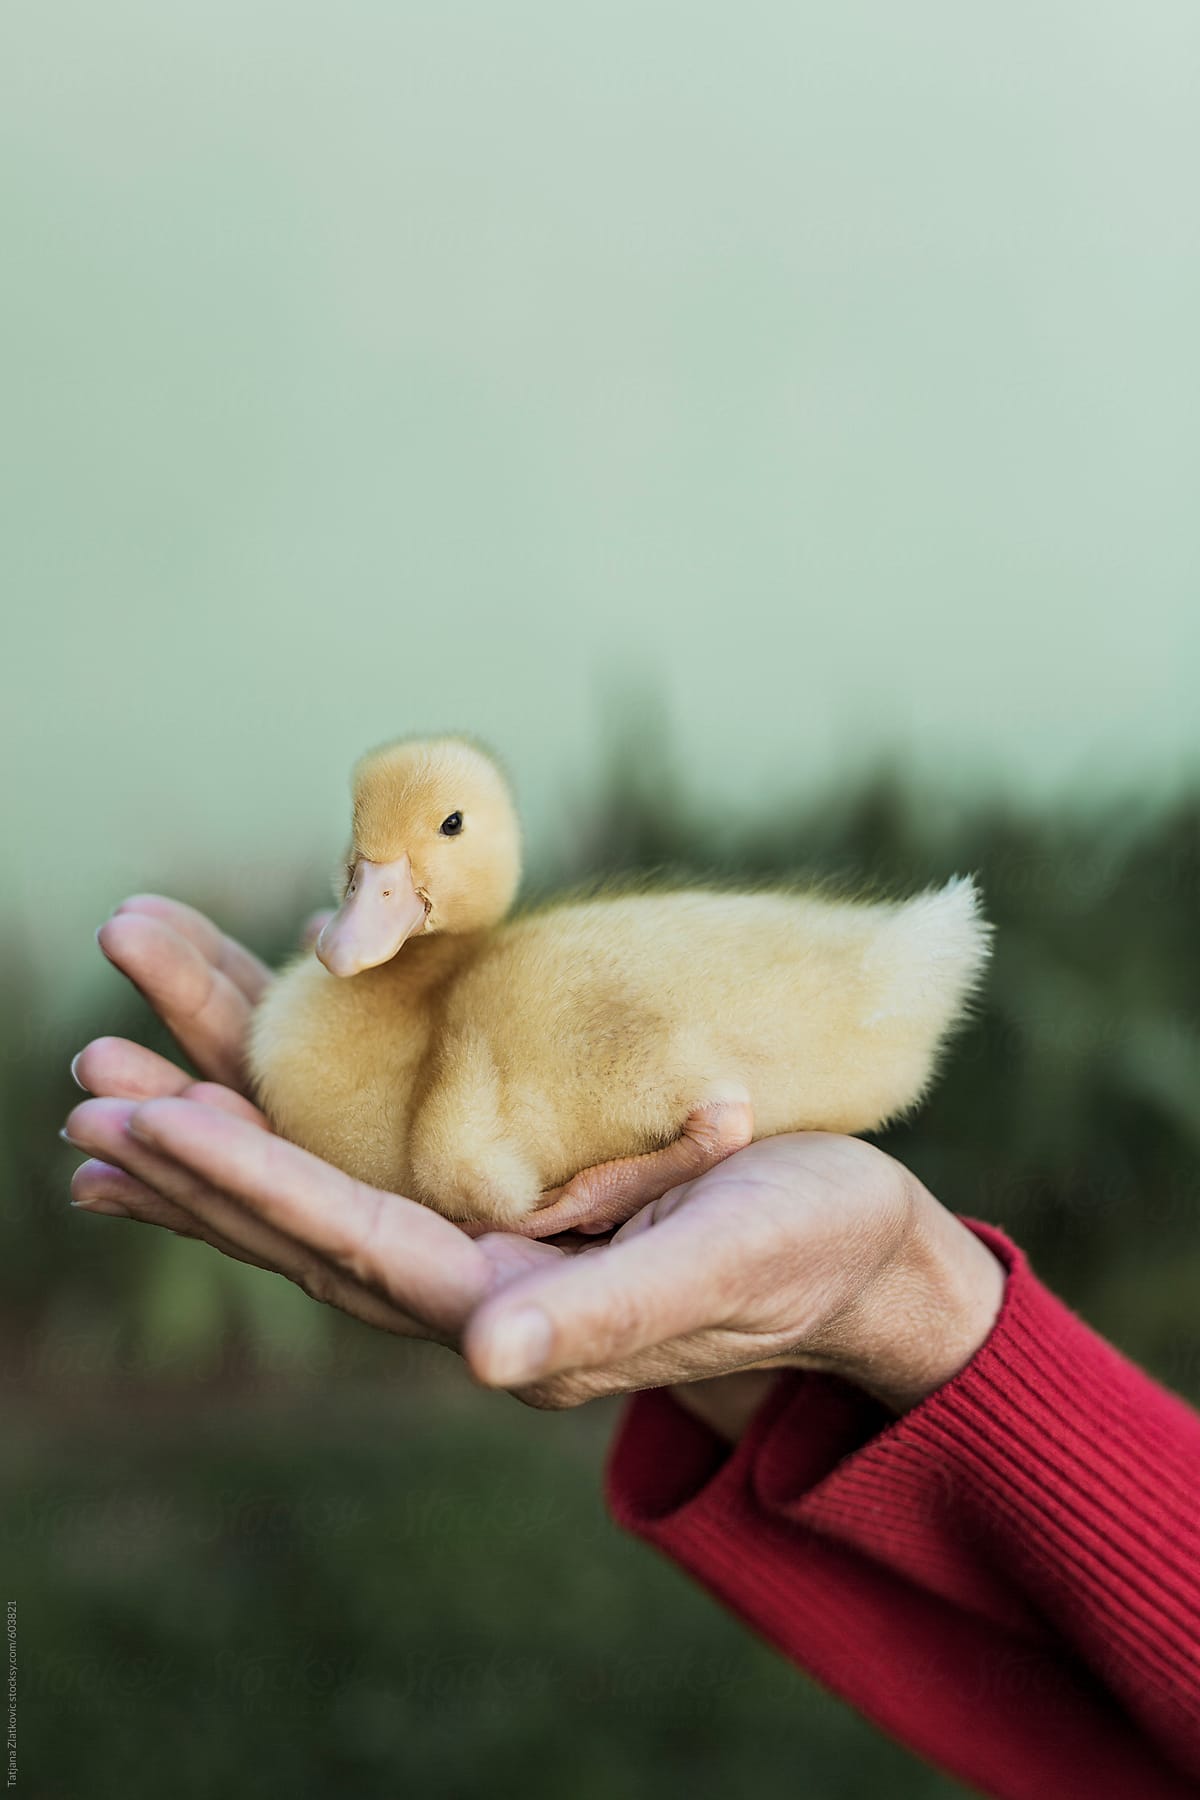 Woman holding small duck